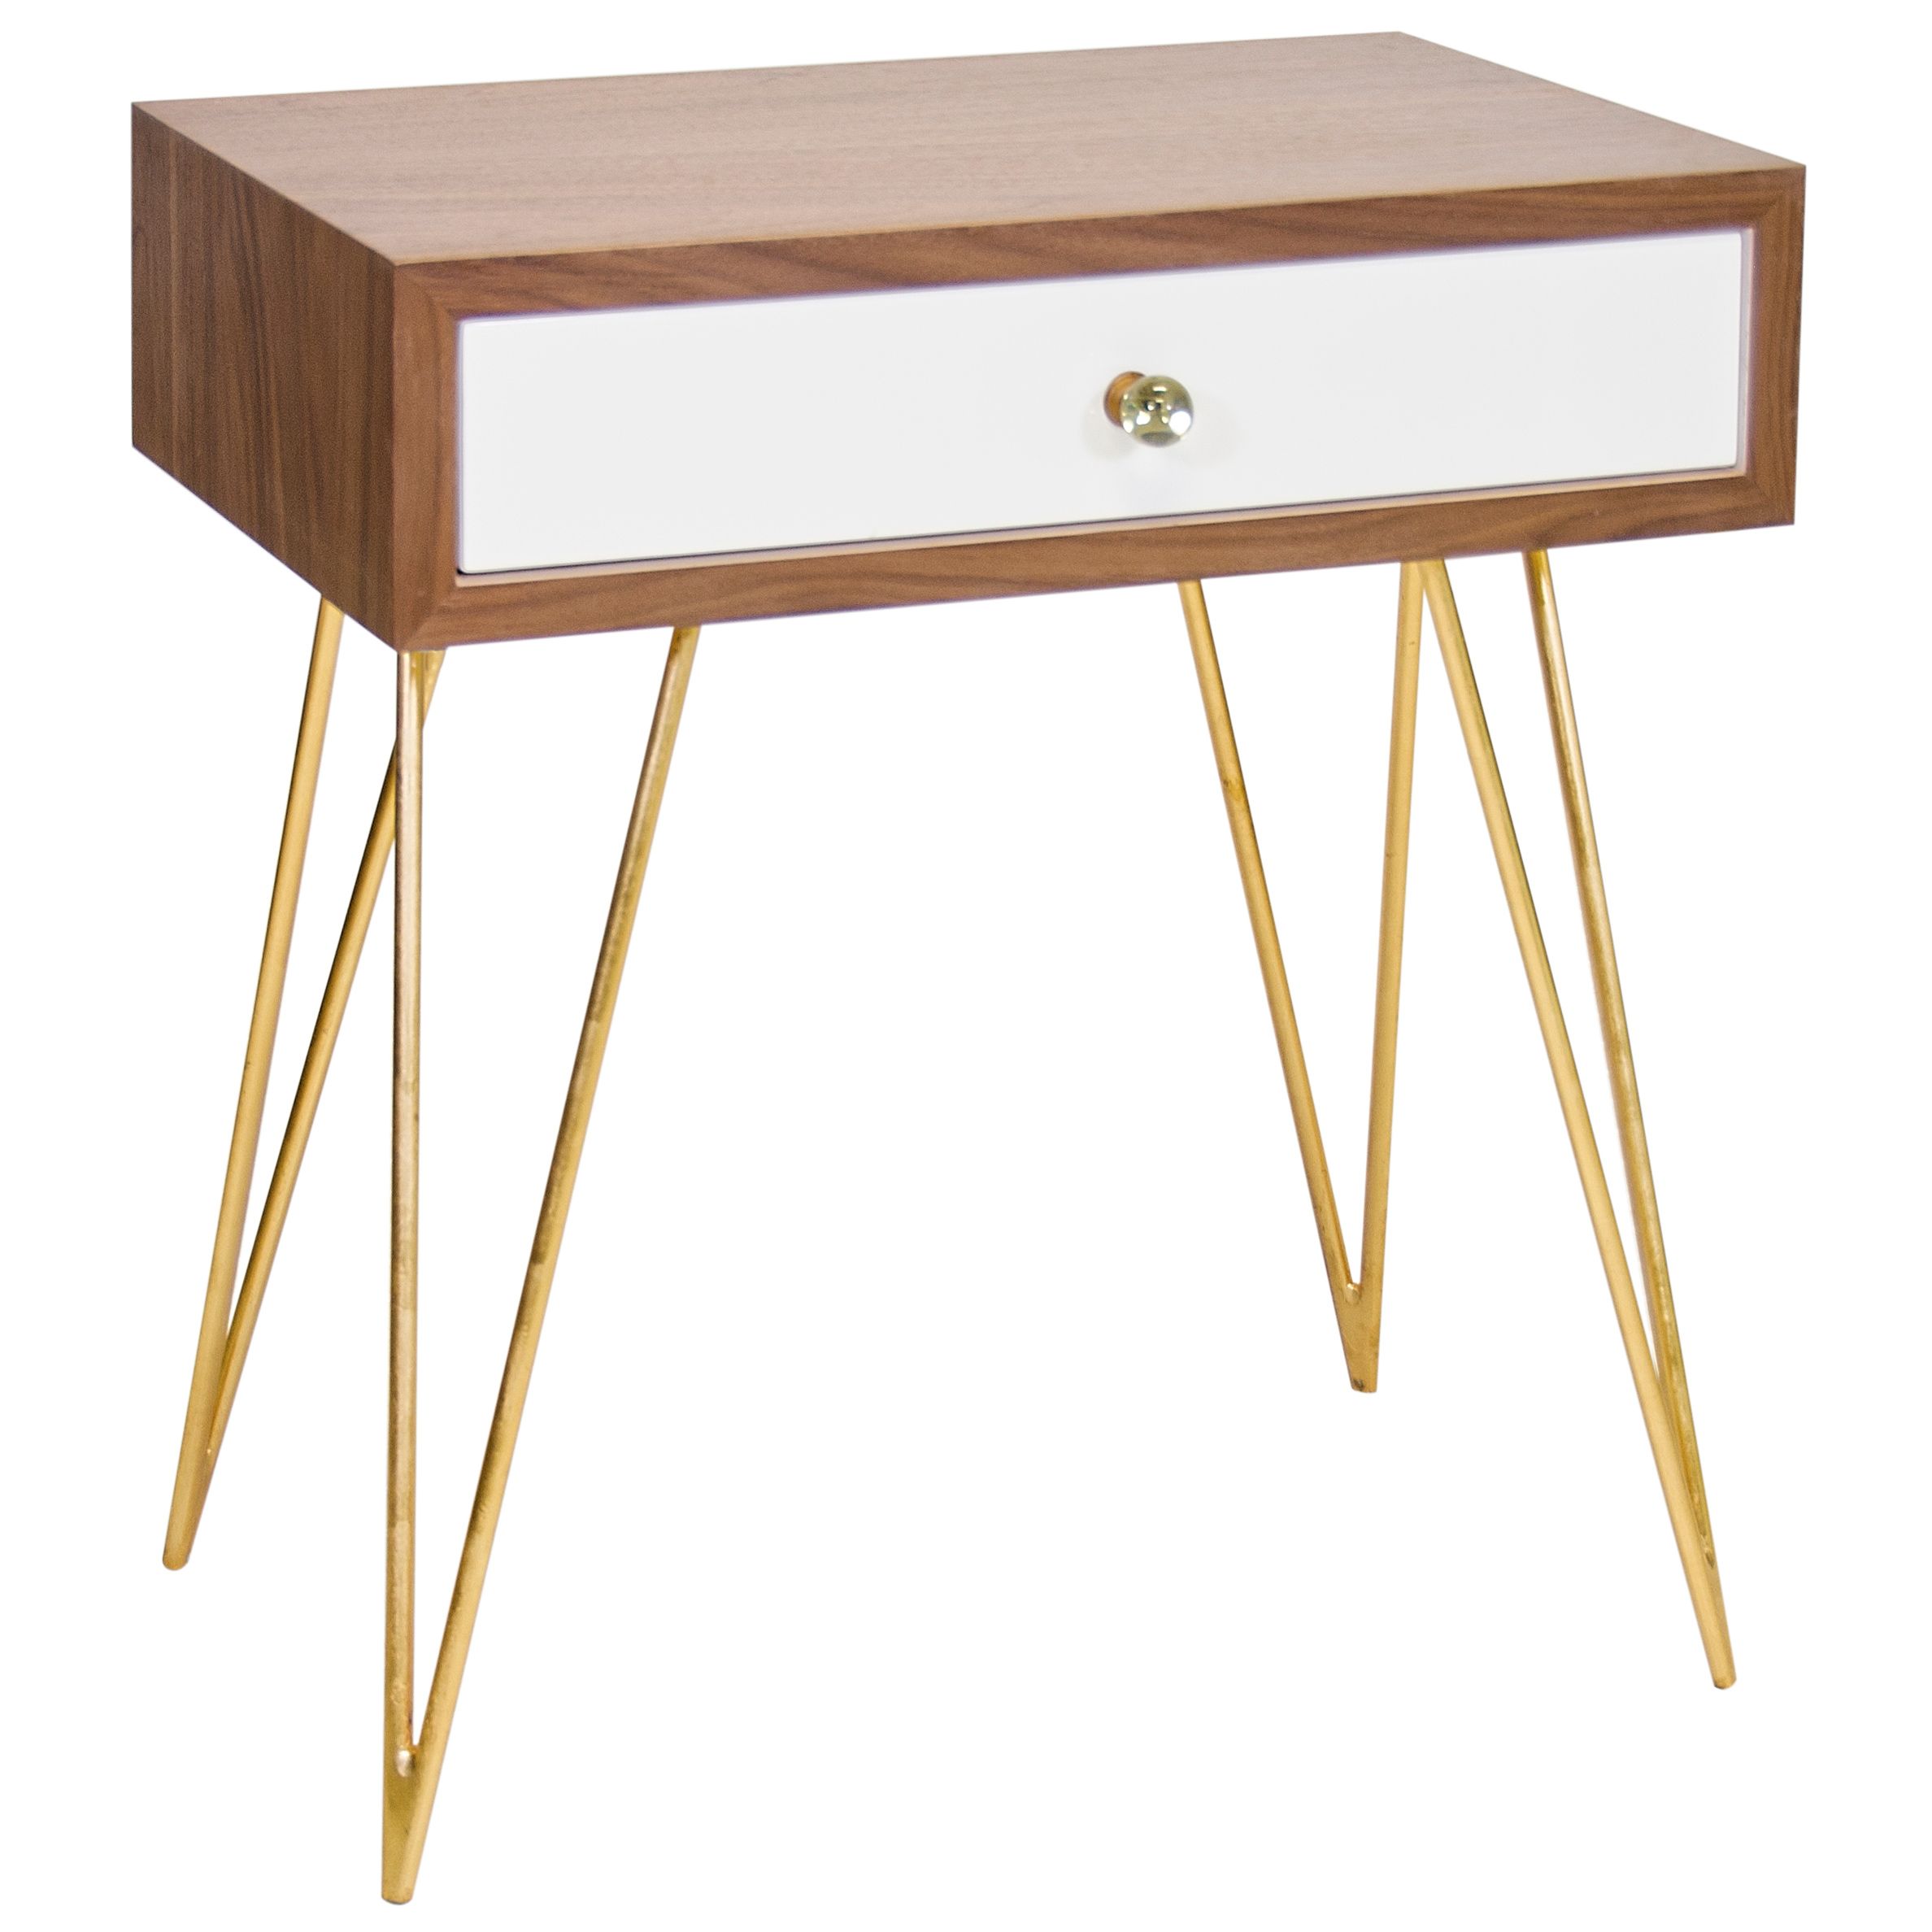 Biscayne Hollywood Regency Walnut White Nightstand Side Table | Kathy Kuo Home